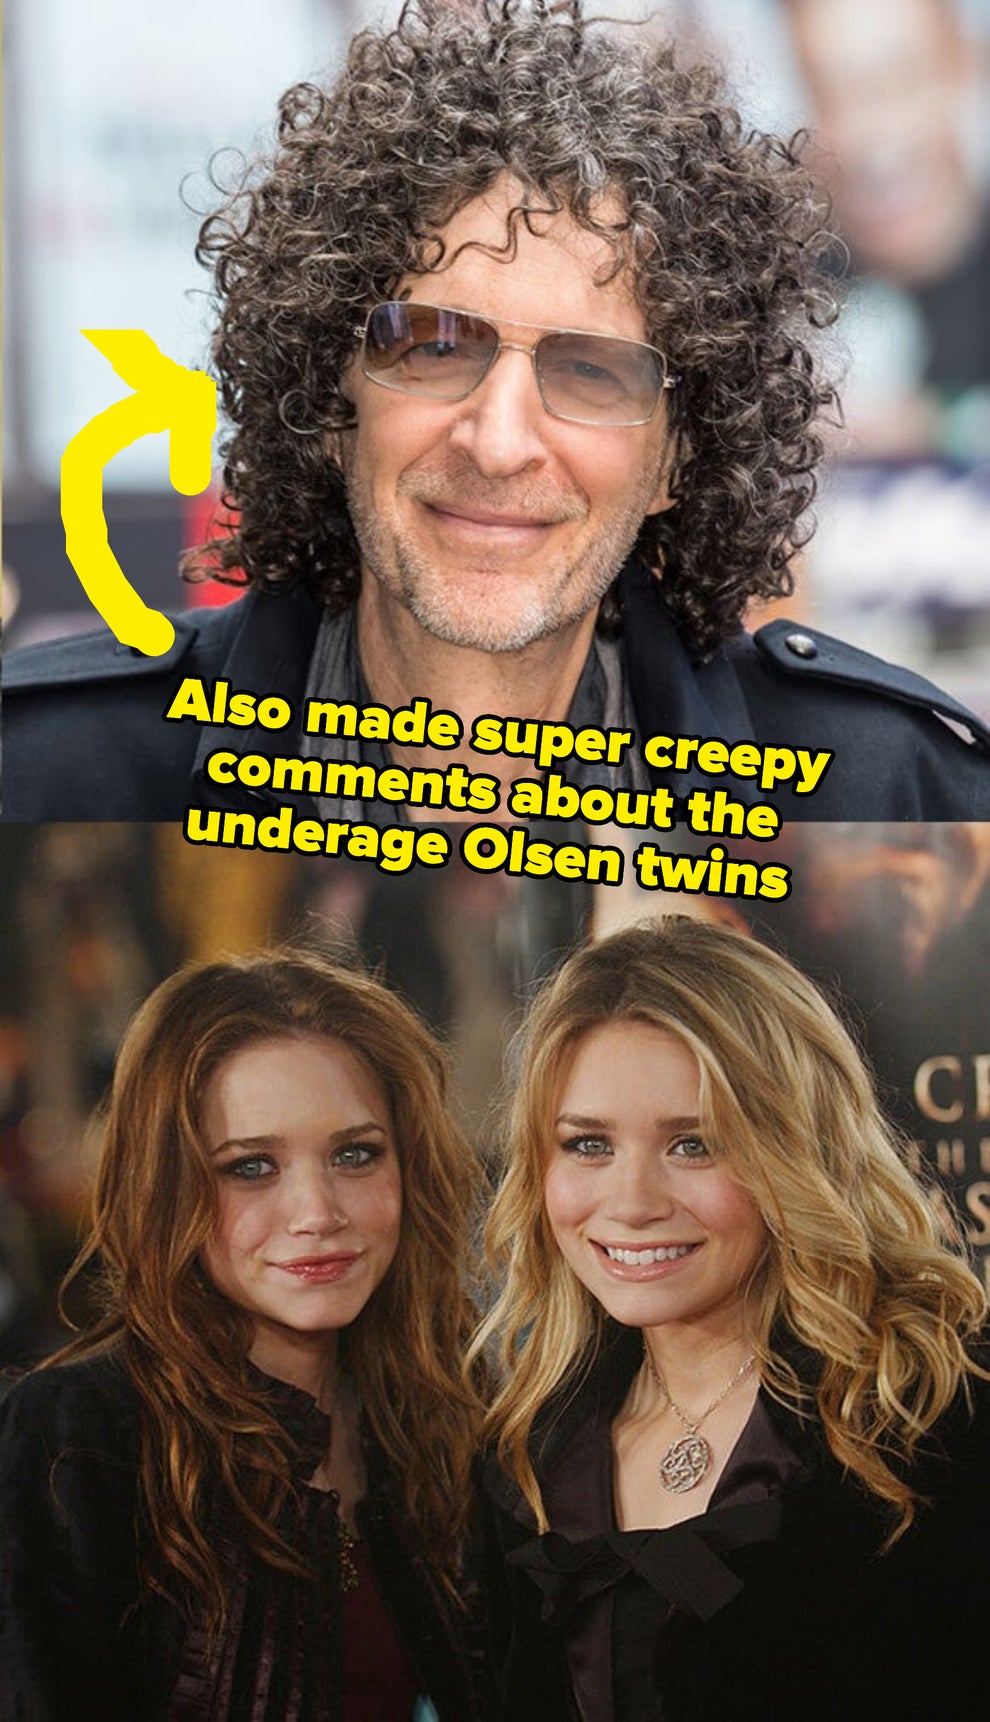 Olsen Twins Fucking Each Other - 19 Celebs Who Were Horribly Sexualized By The Media